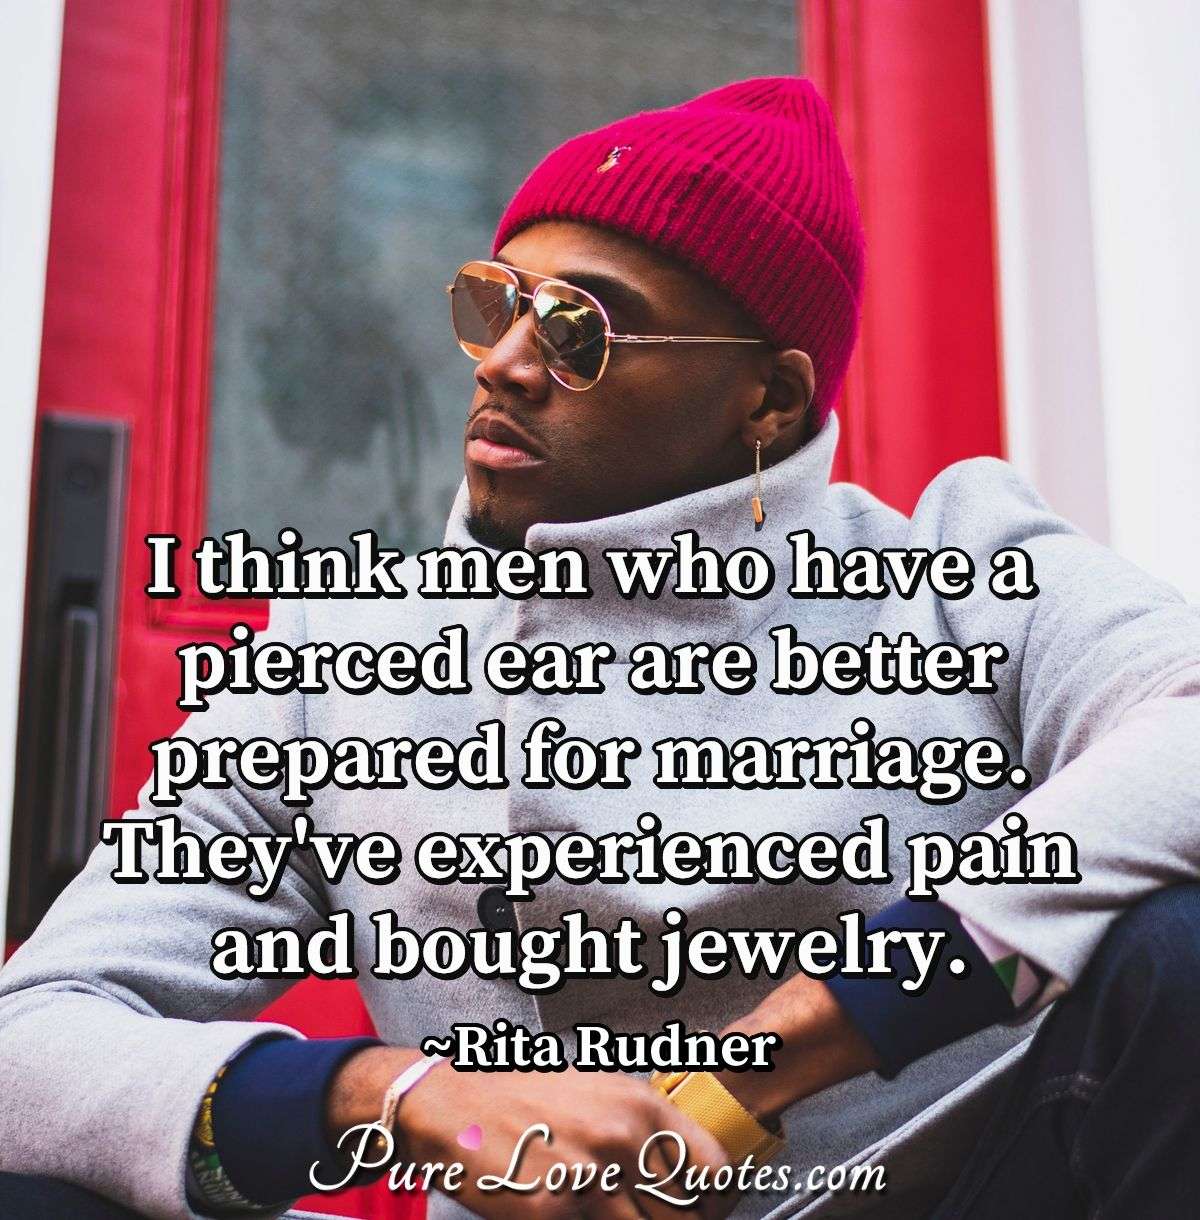 I think men who have a pierced ear are better prepared for marriage. They've experienced pain and bought jewelry. - Rita Rudner